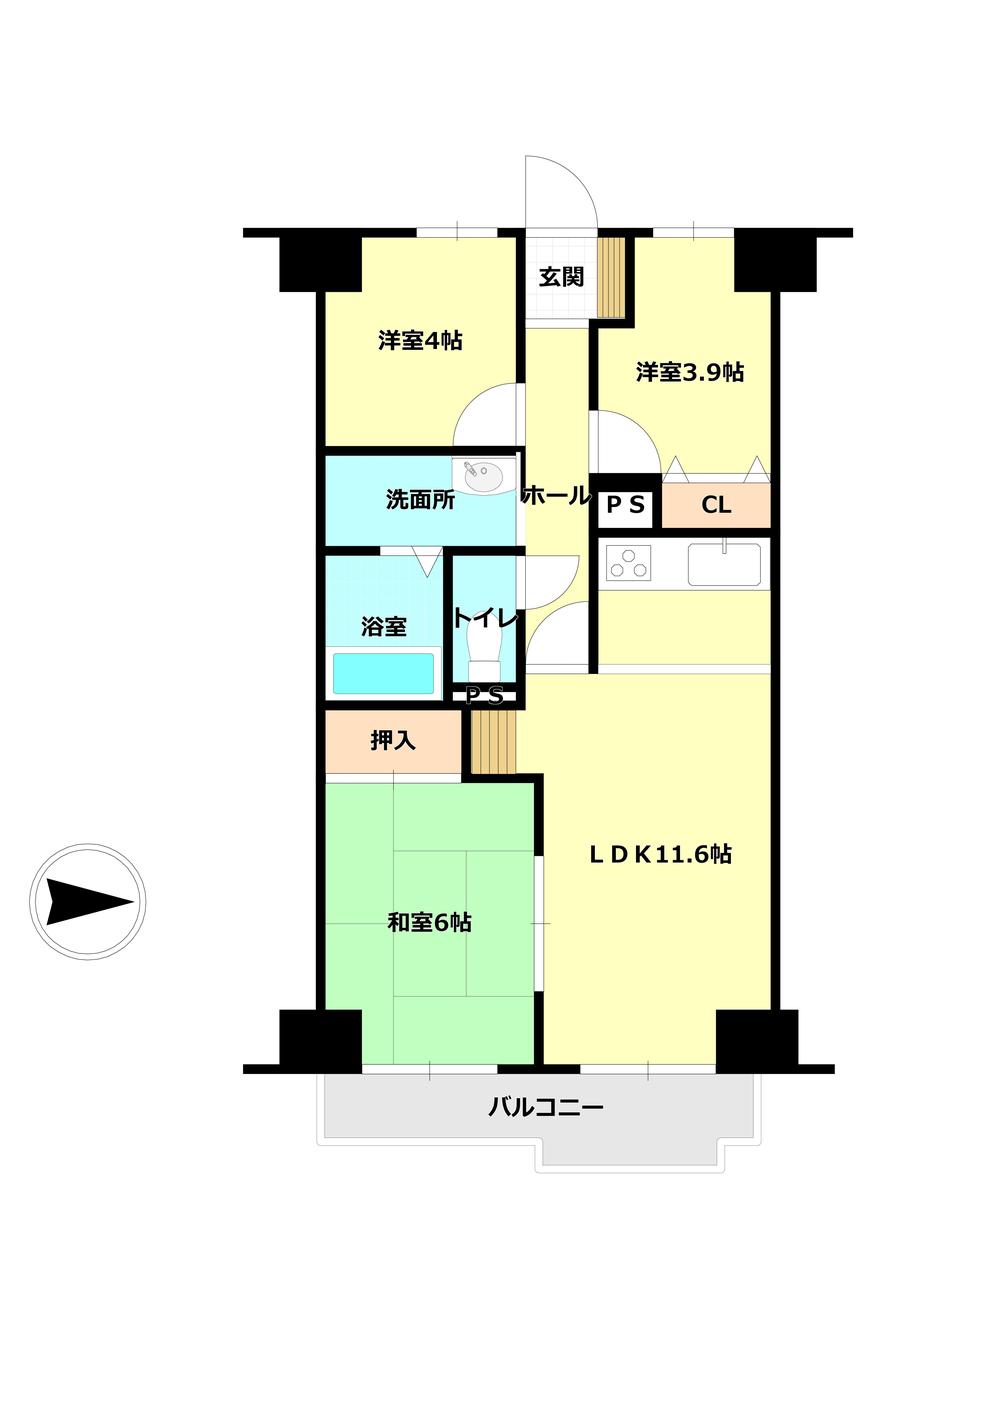 Floor plan. 3LDK, Price 6.9 million yen, Occupied area 58.74 sq m , We will give priority to the balcony area 6.91 sq m Current Status.